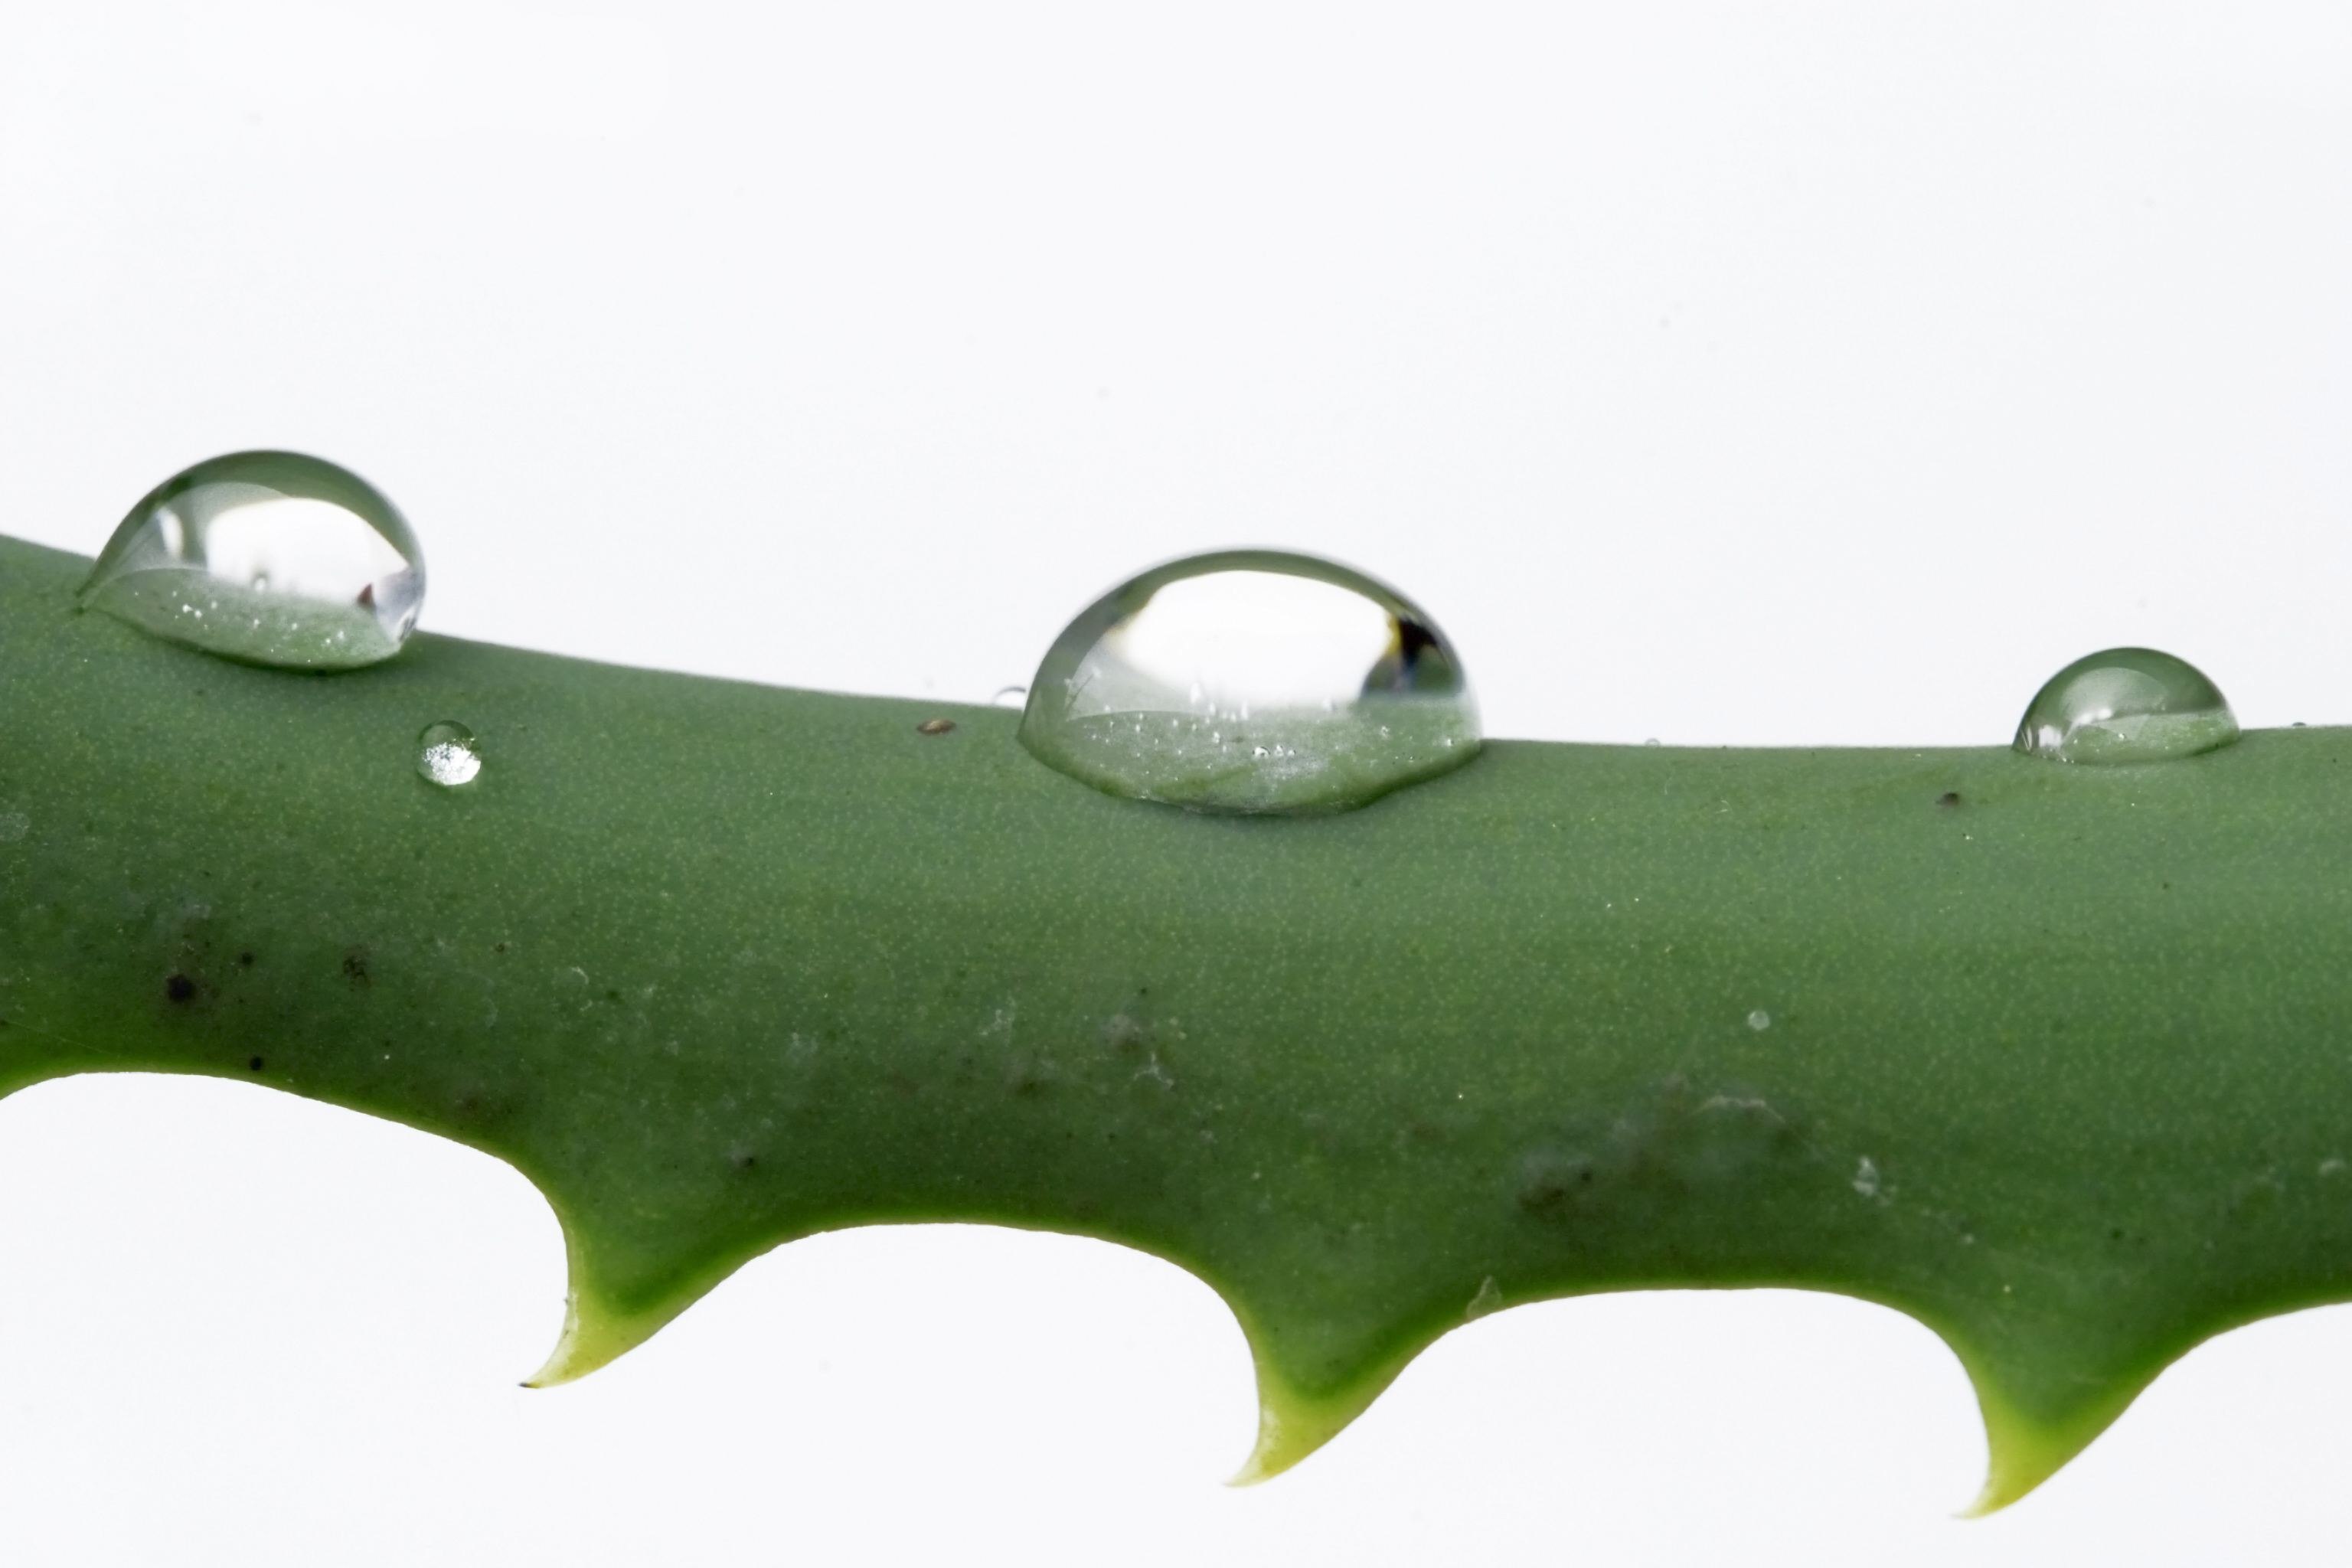 Combat a Frustrating Itch with Aloe Vera for Dry Skin